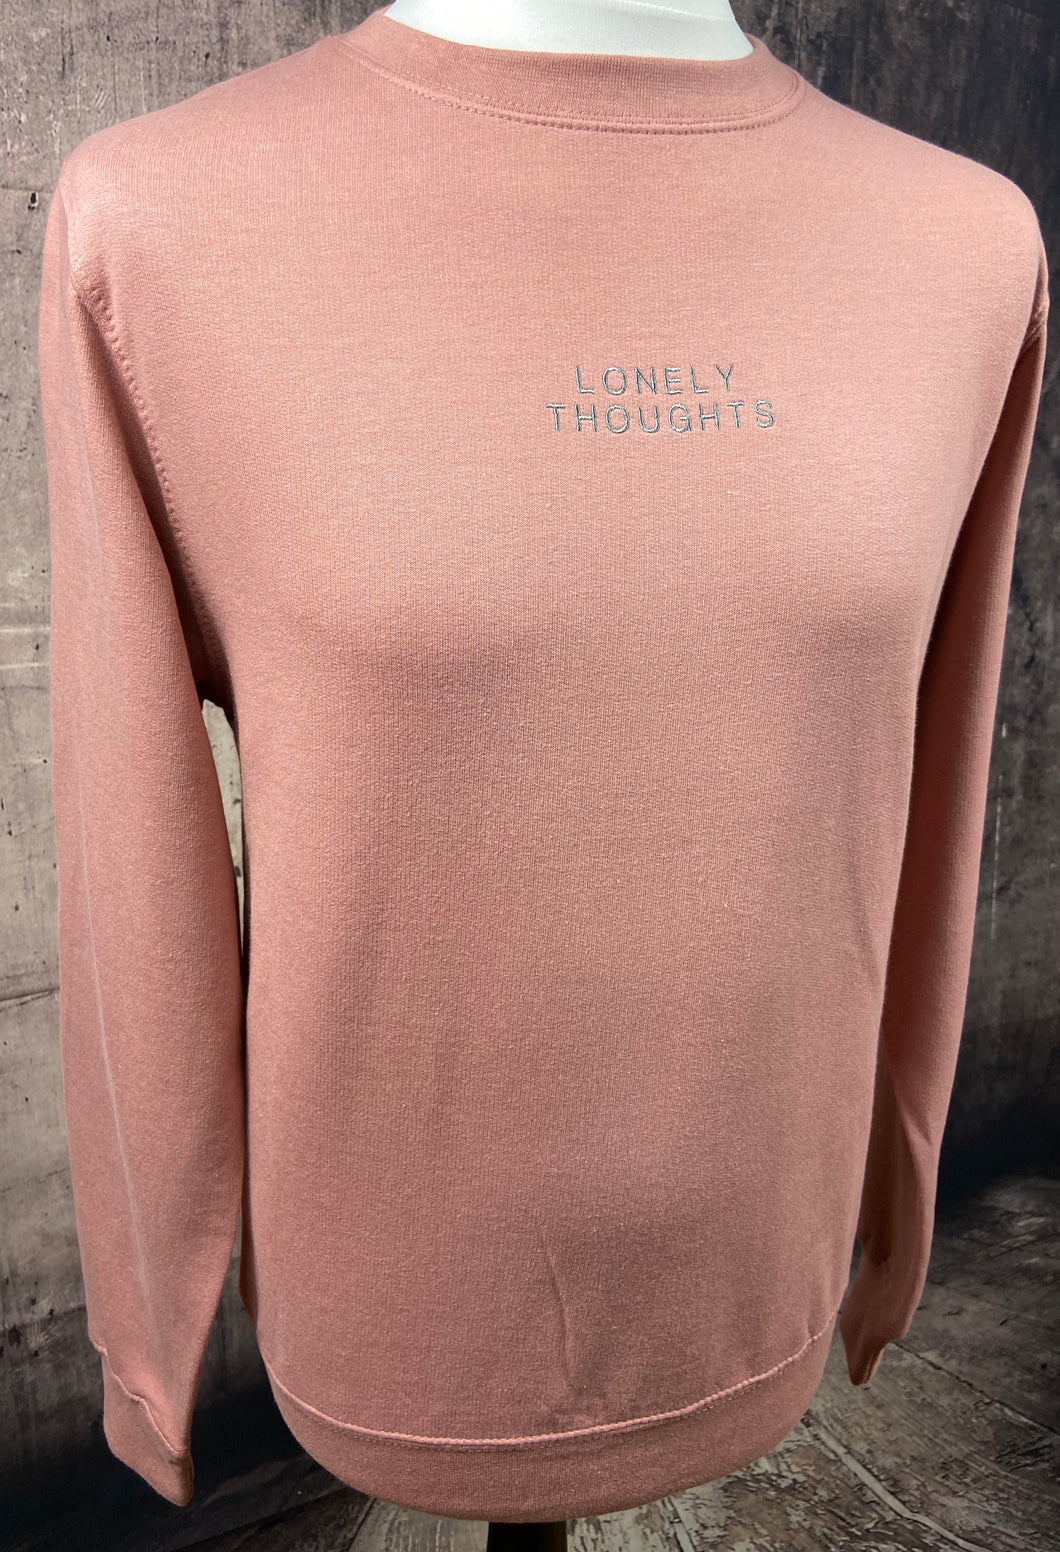 LONELY THOUGHTS SWEATSHIRT